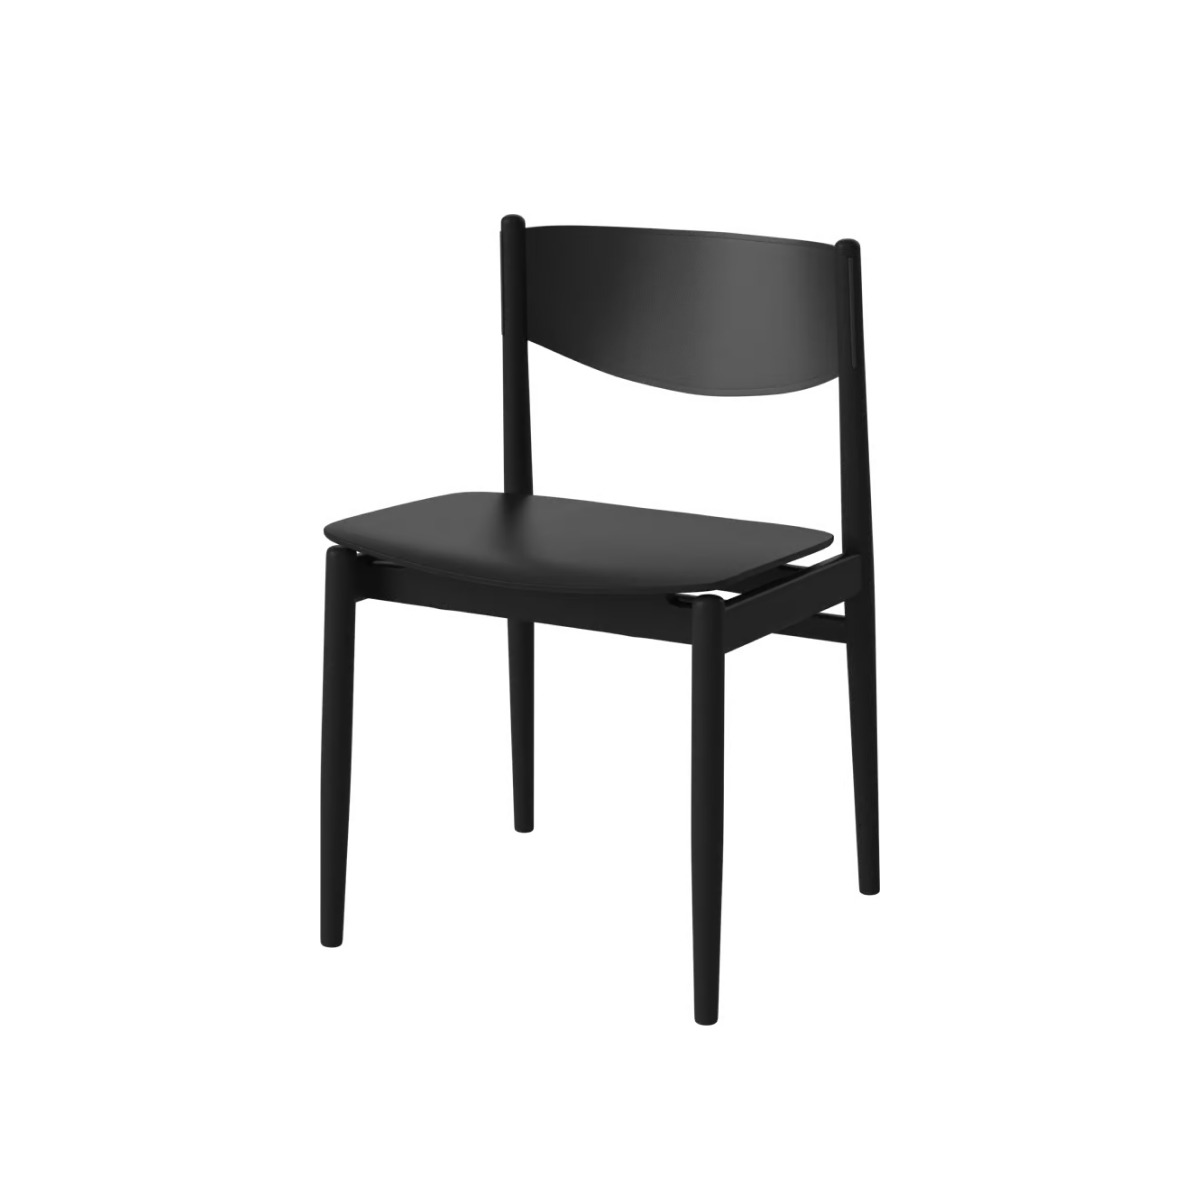 BOLIA Apelle Dining Chair - Black Ash 2color